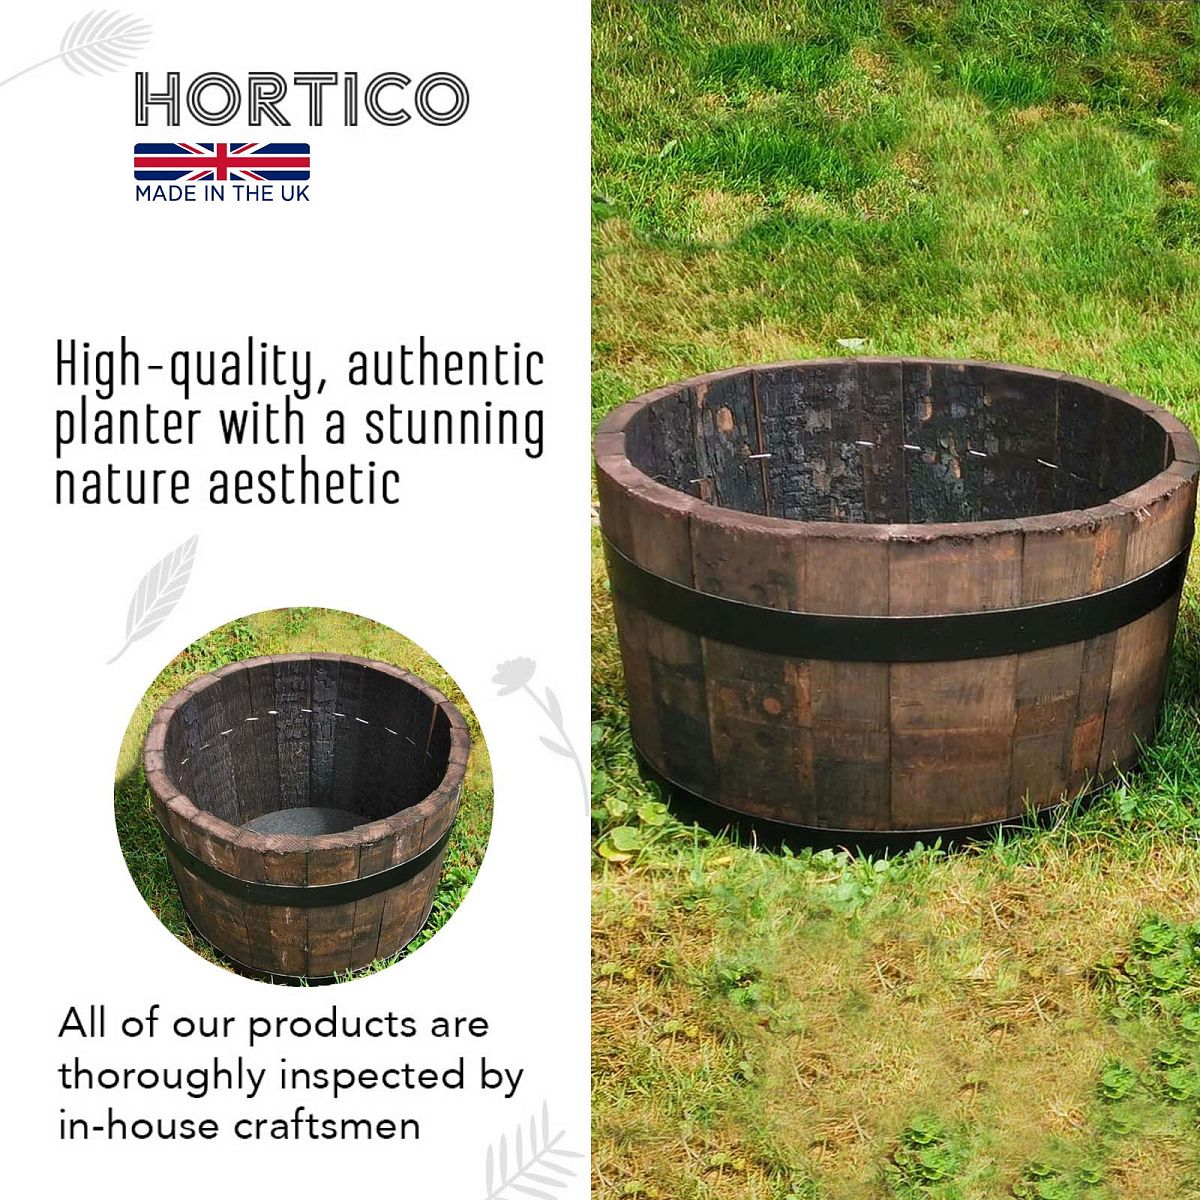 Rustic Upcycled Oak Wood Round Tub Half Barrel Outdoor Planter Made in UK by HORTICO